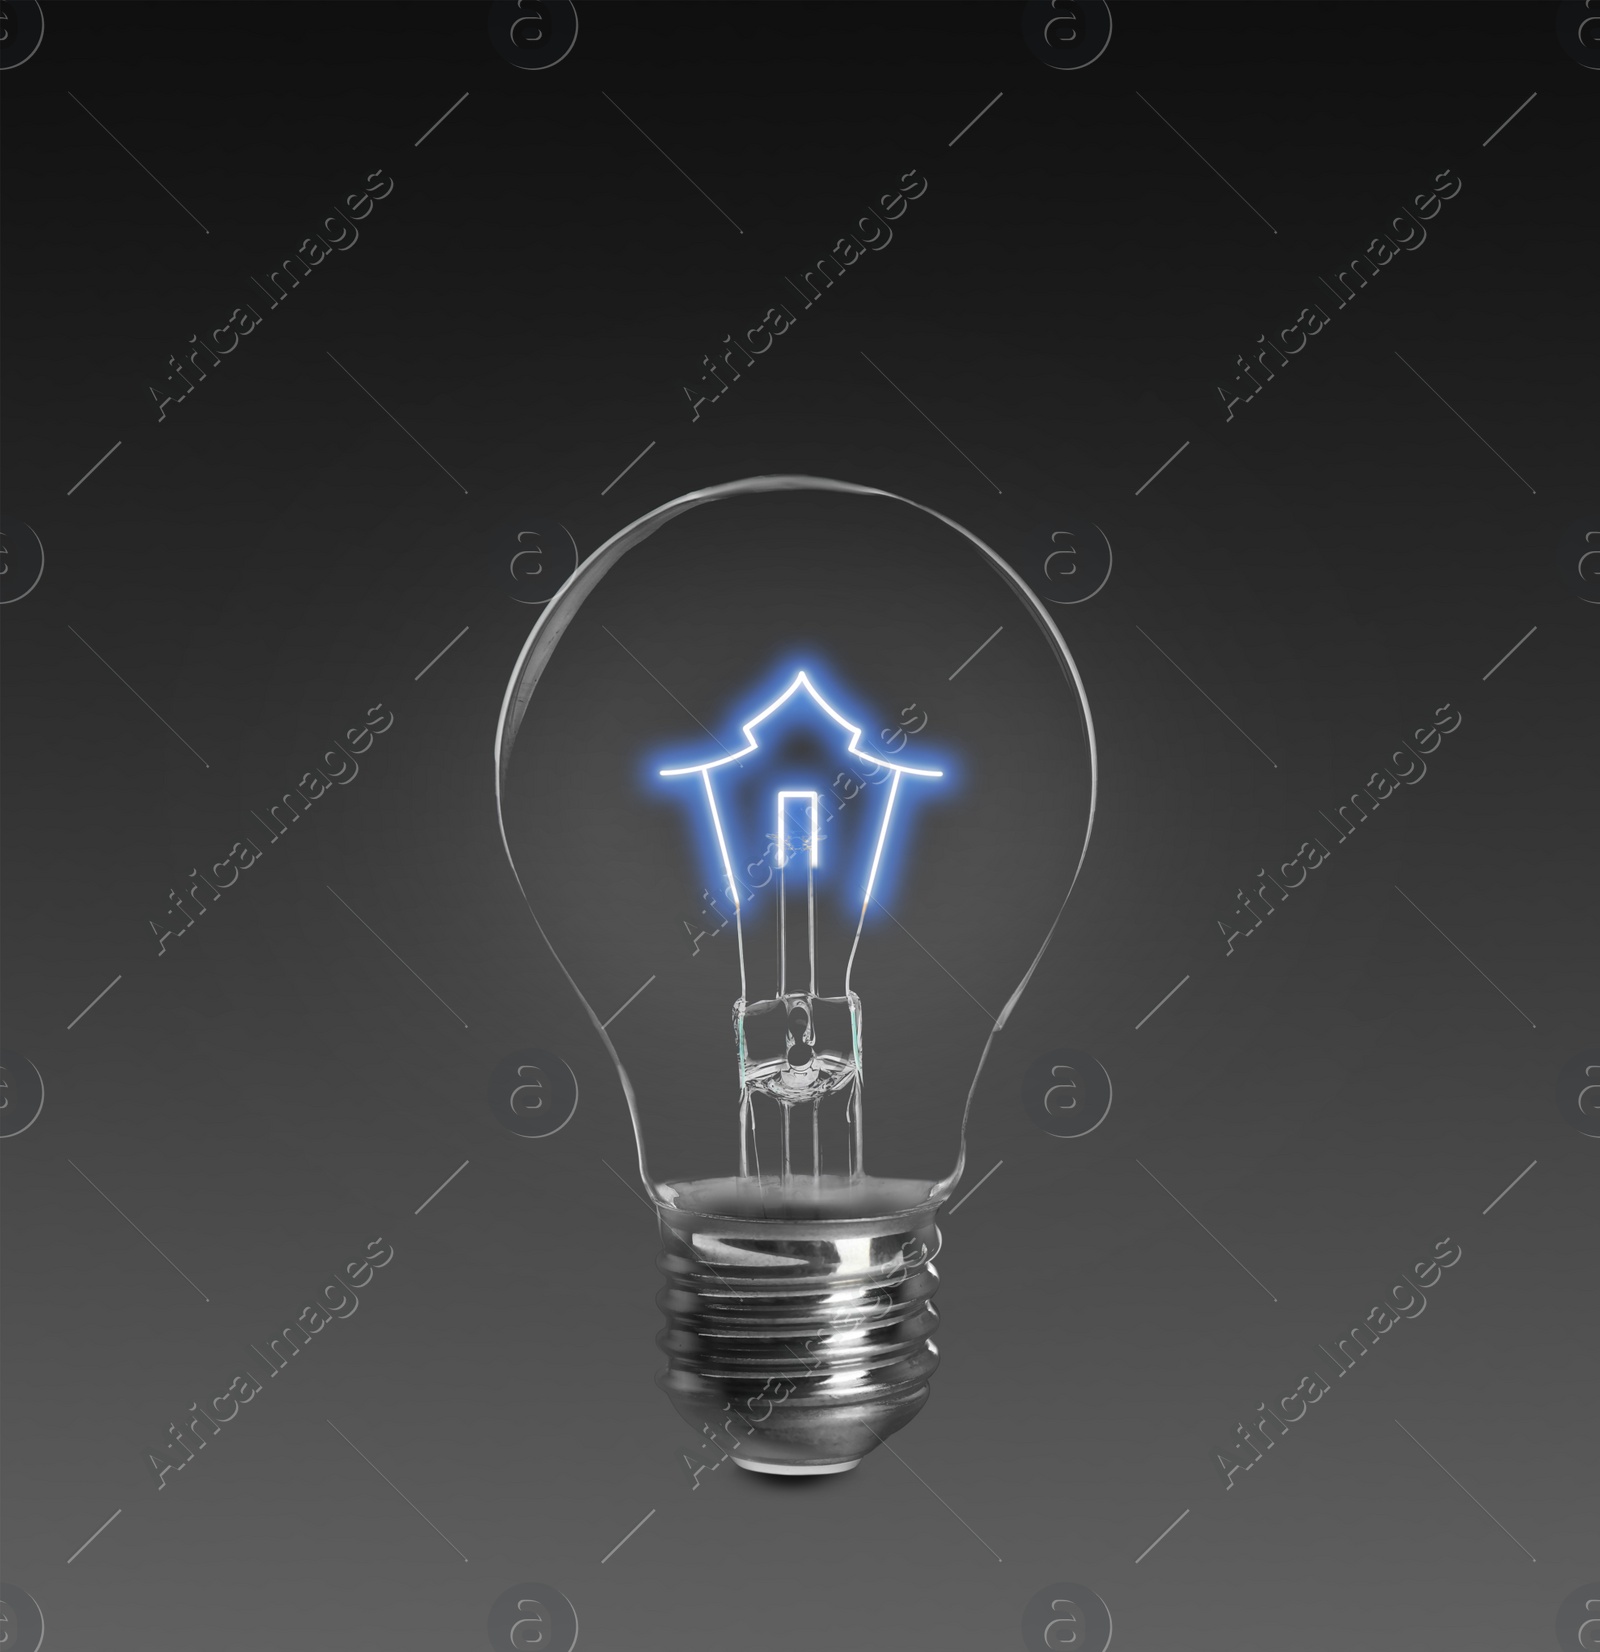 Image of Light bulb with tungsten filament in shape on house on dark background. Energy efficiency, loan, property or business idea concepts